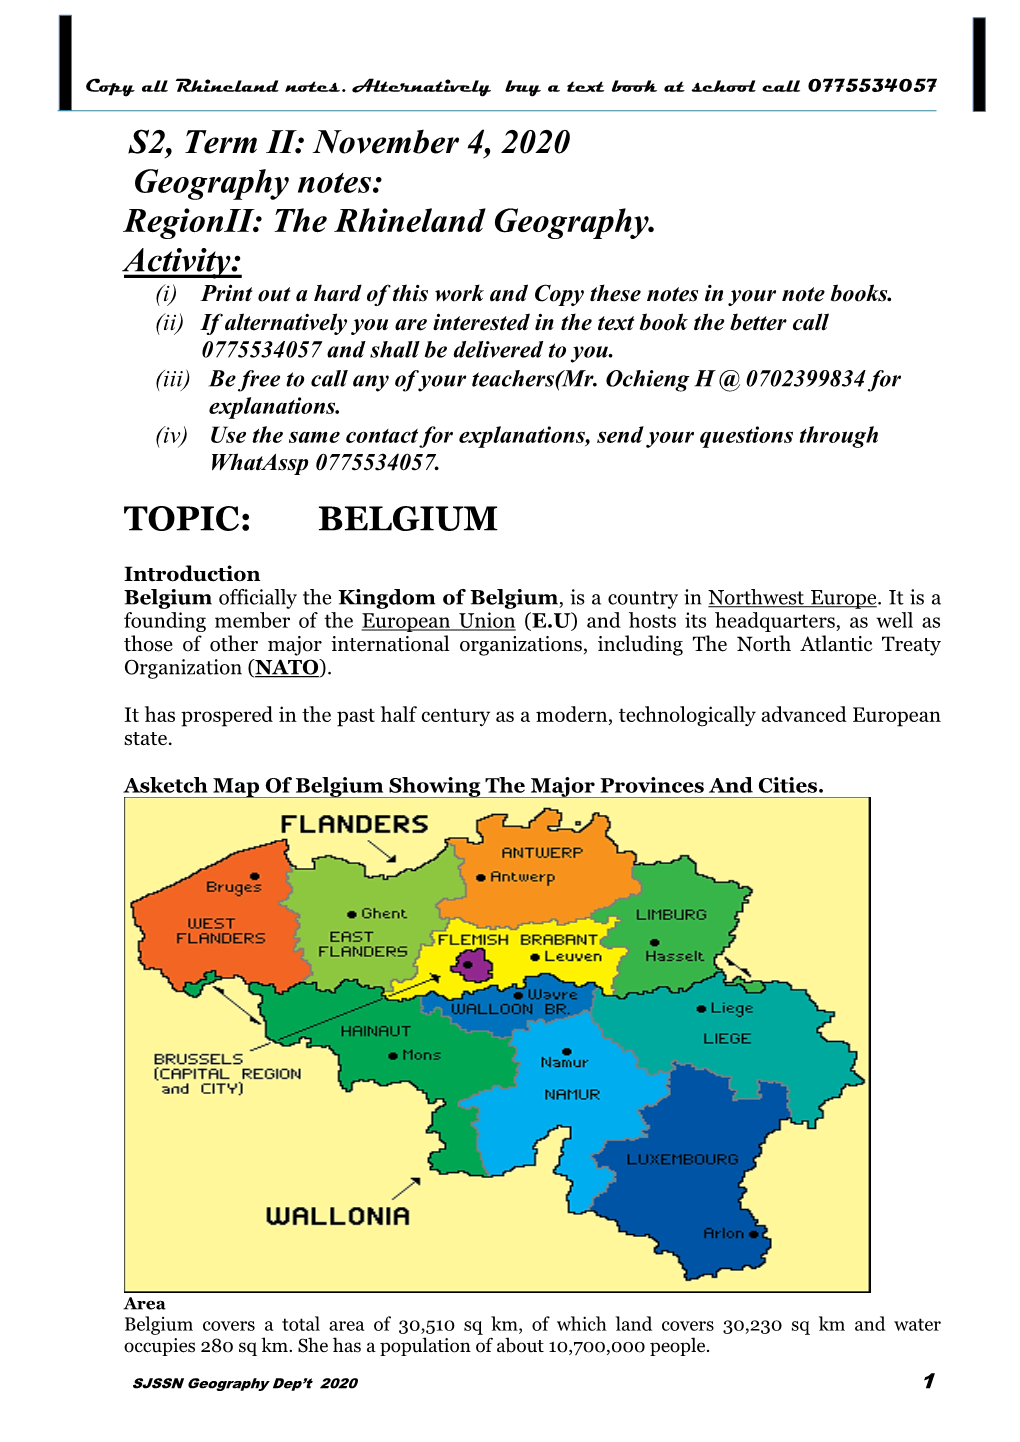 S2 Belgium Geography Notes @ Covid-19 2020